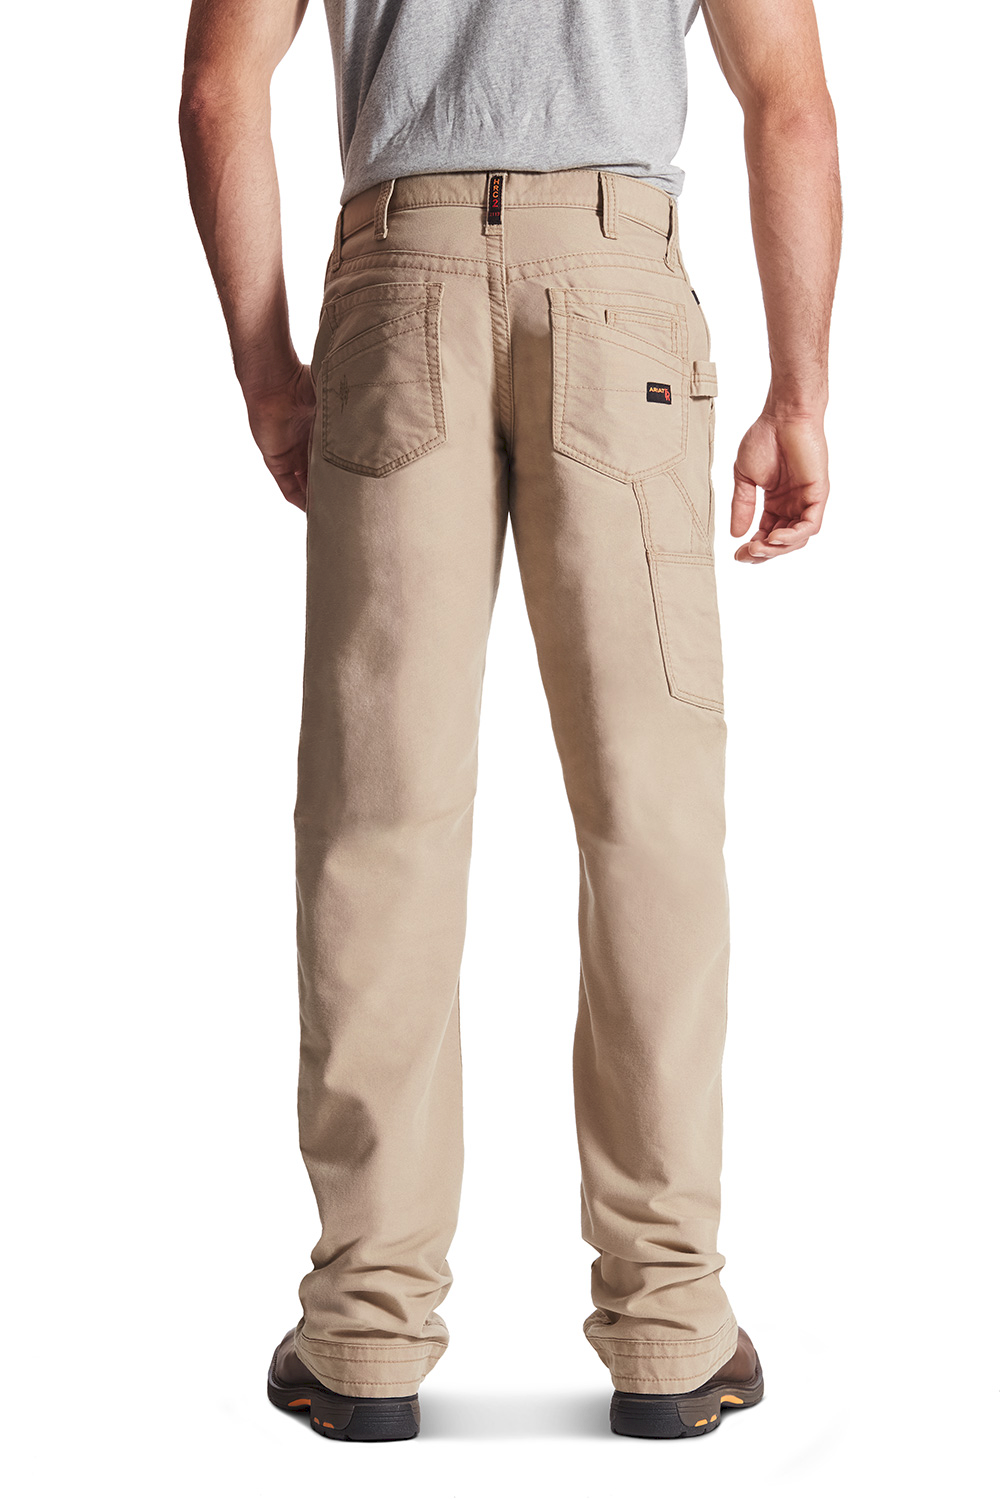 FXD Mens  WP5 Stretch Tech Light Weight Work Pants  Khaki  Go Boot  Country